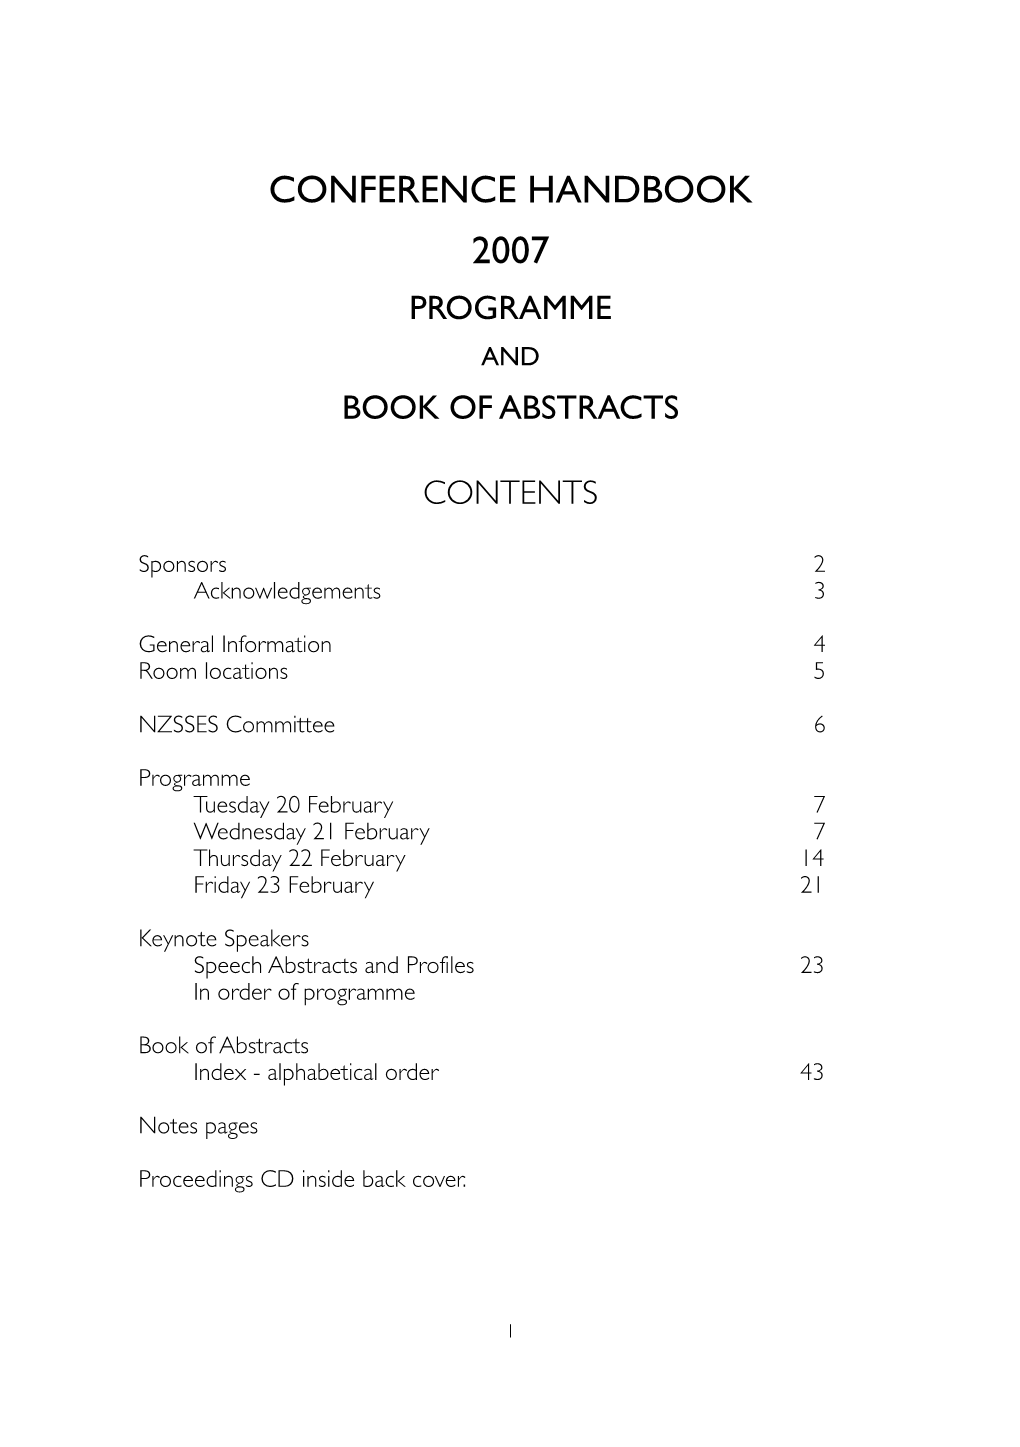 Handbook 2007 Programme and Book of Abstracts